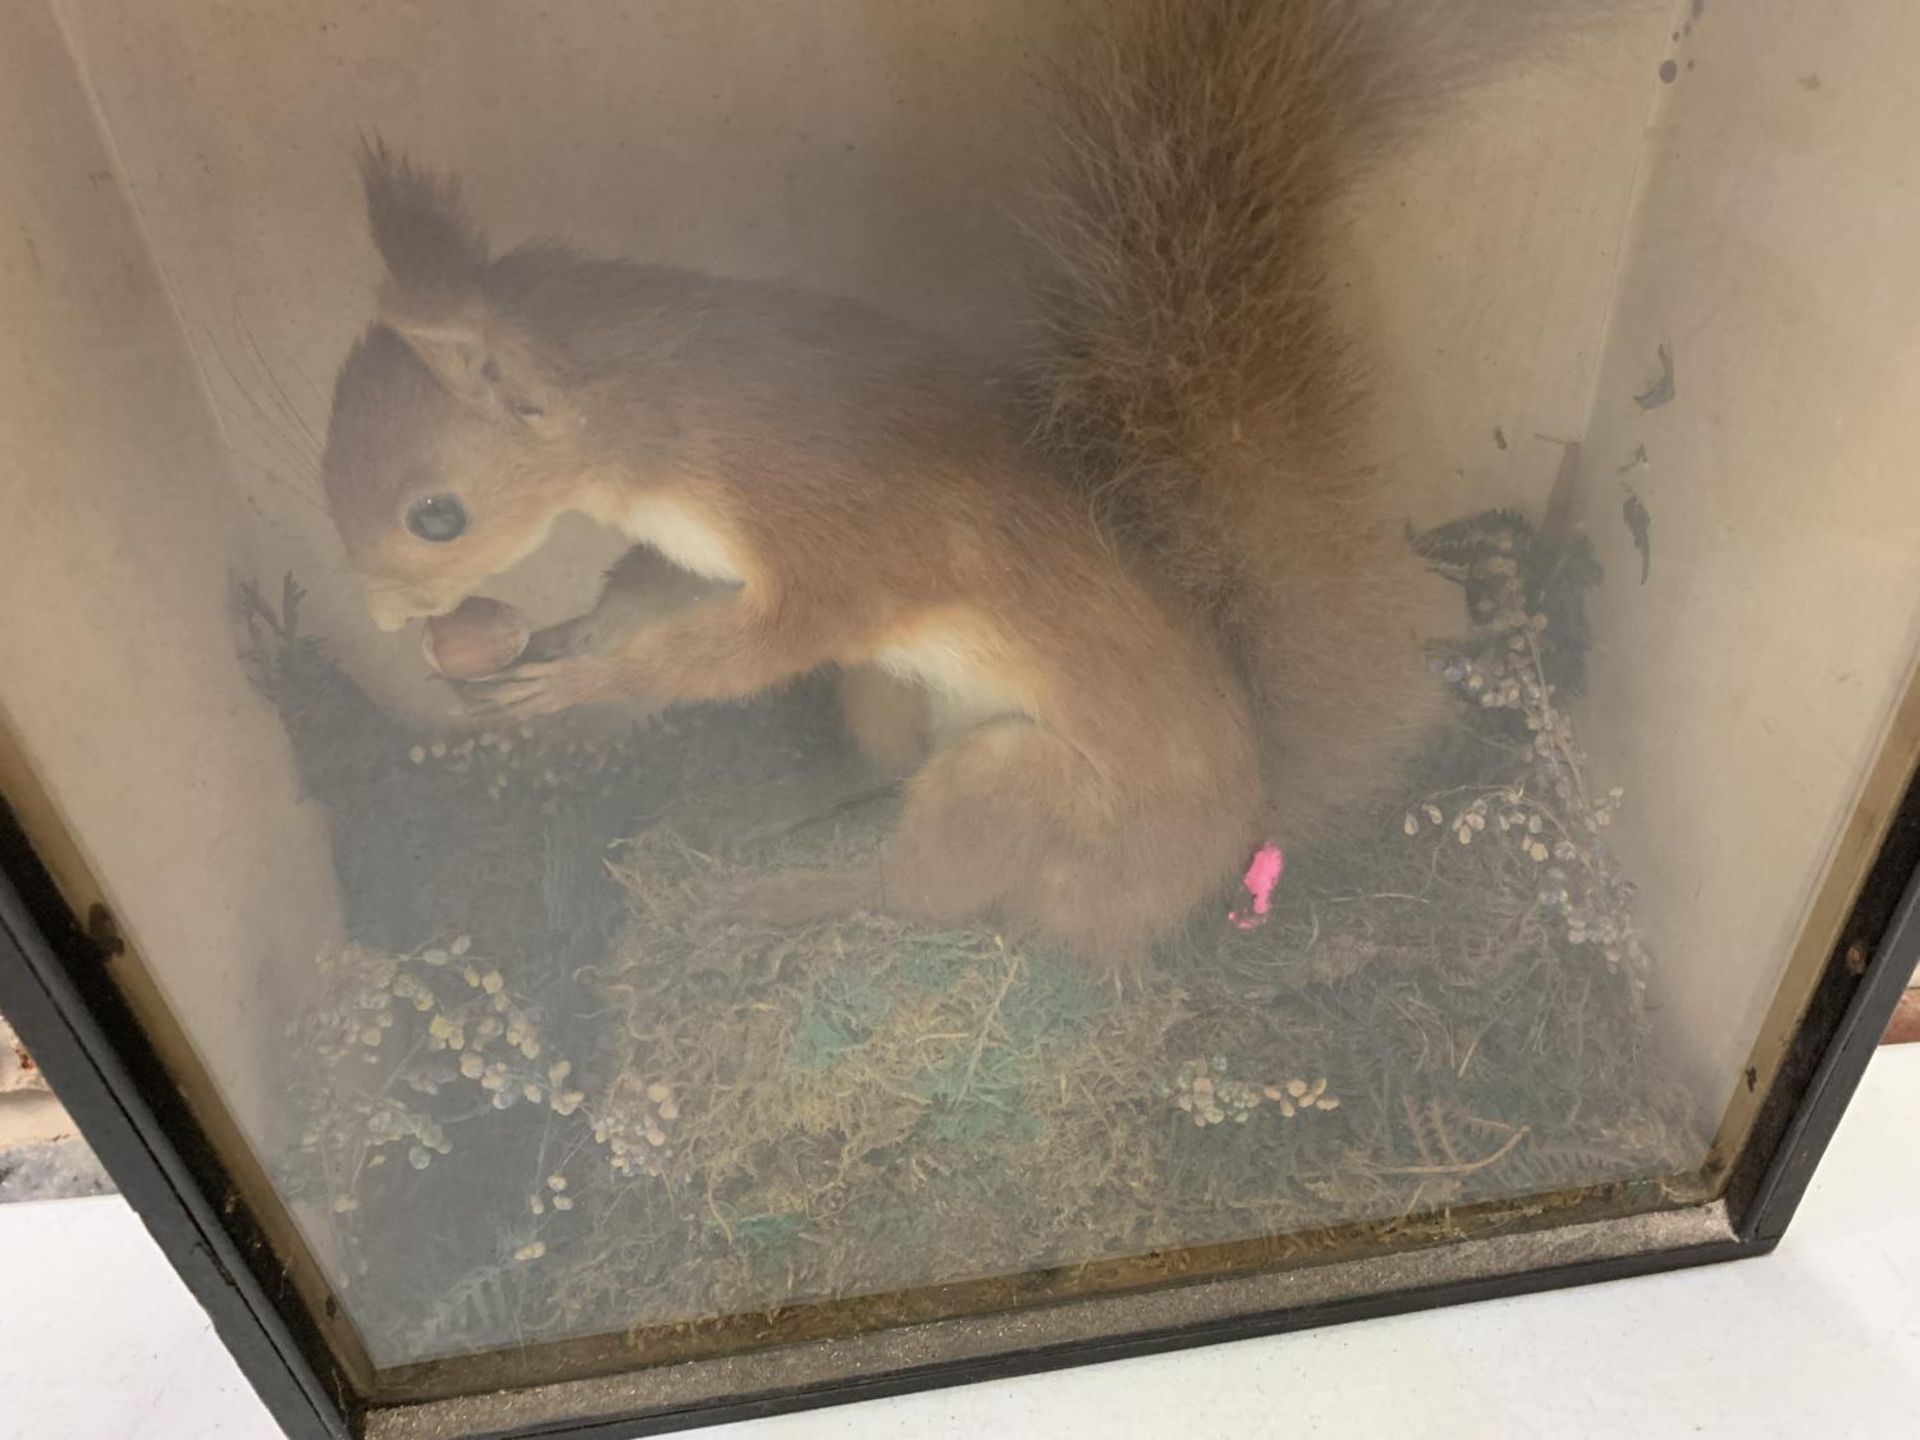 A WOODEN AND GLASS CASED TAXIDERMY OF A RED SQUIRREL WITH A NUT - Image 2 of 3